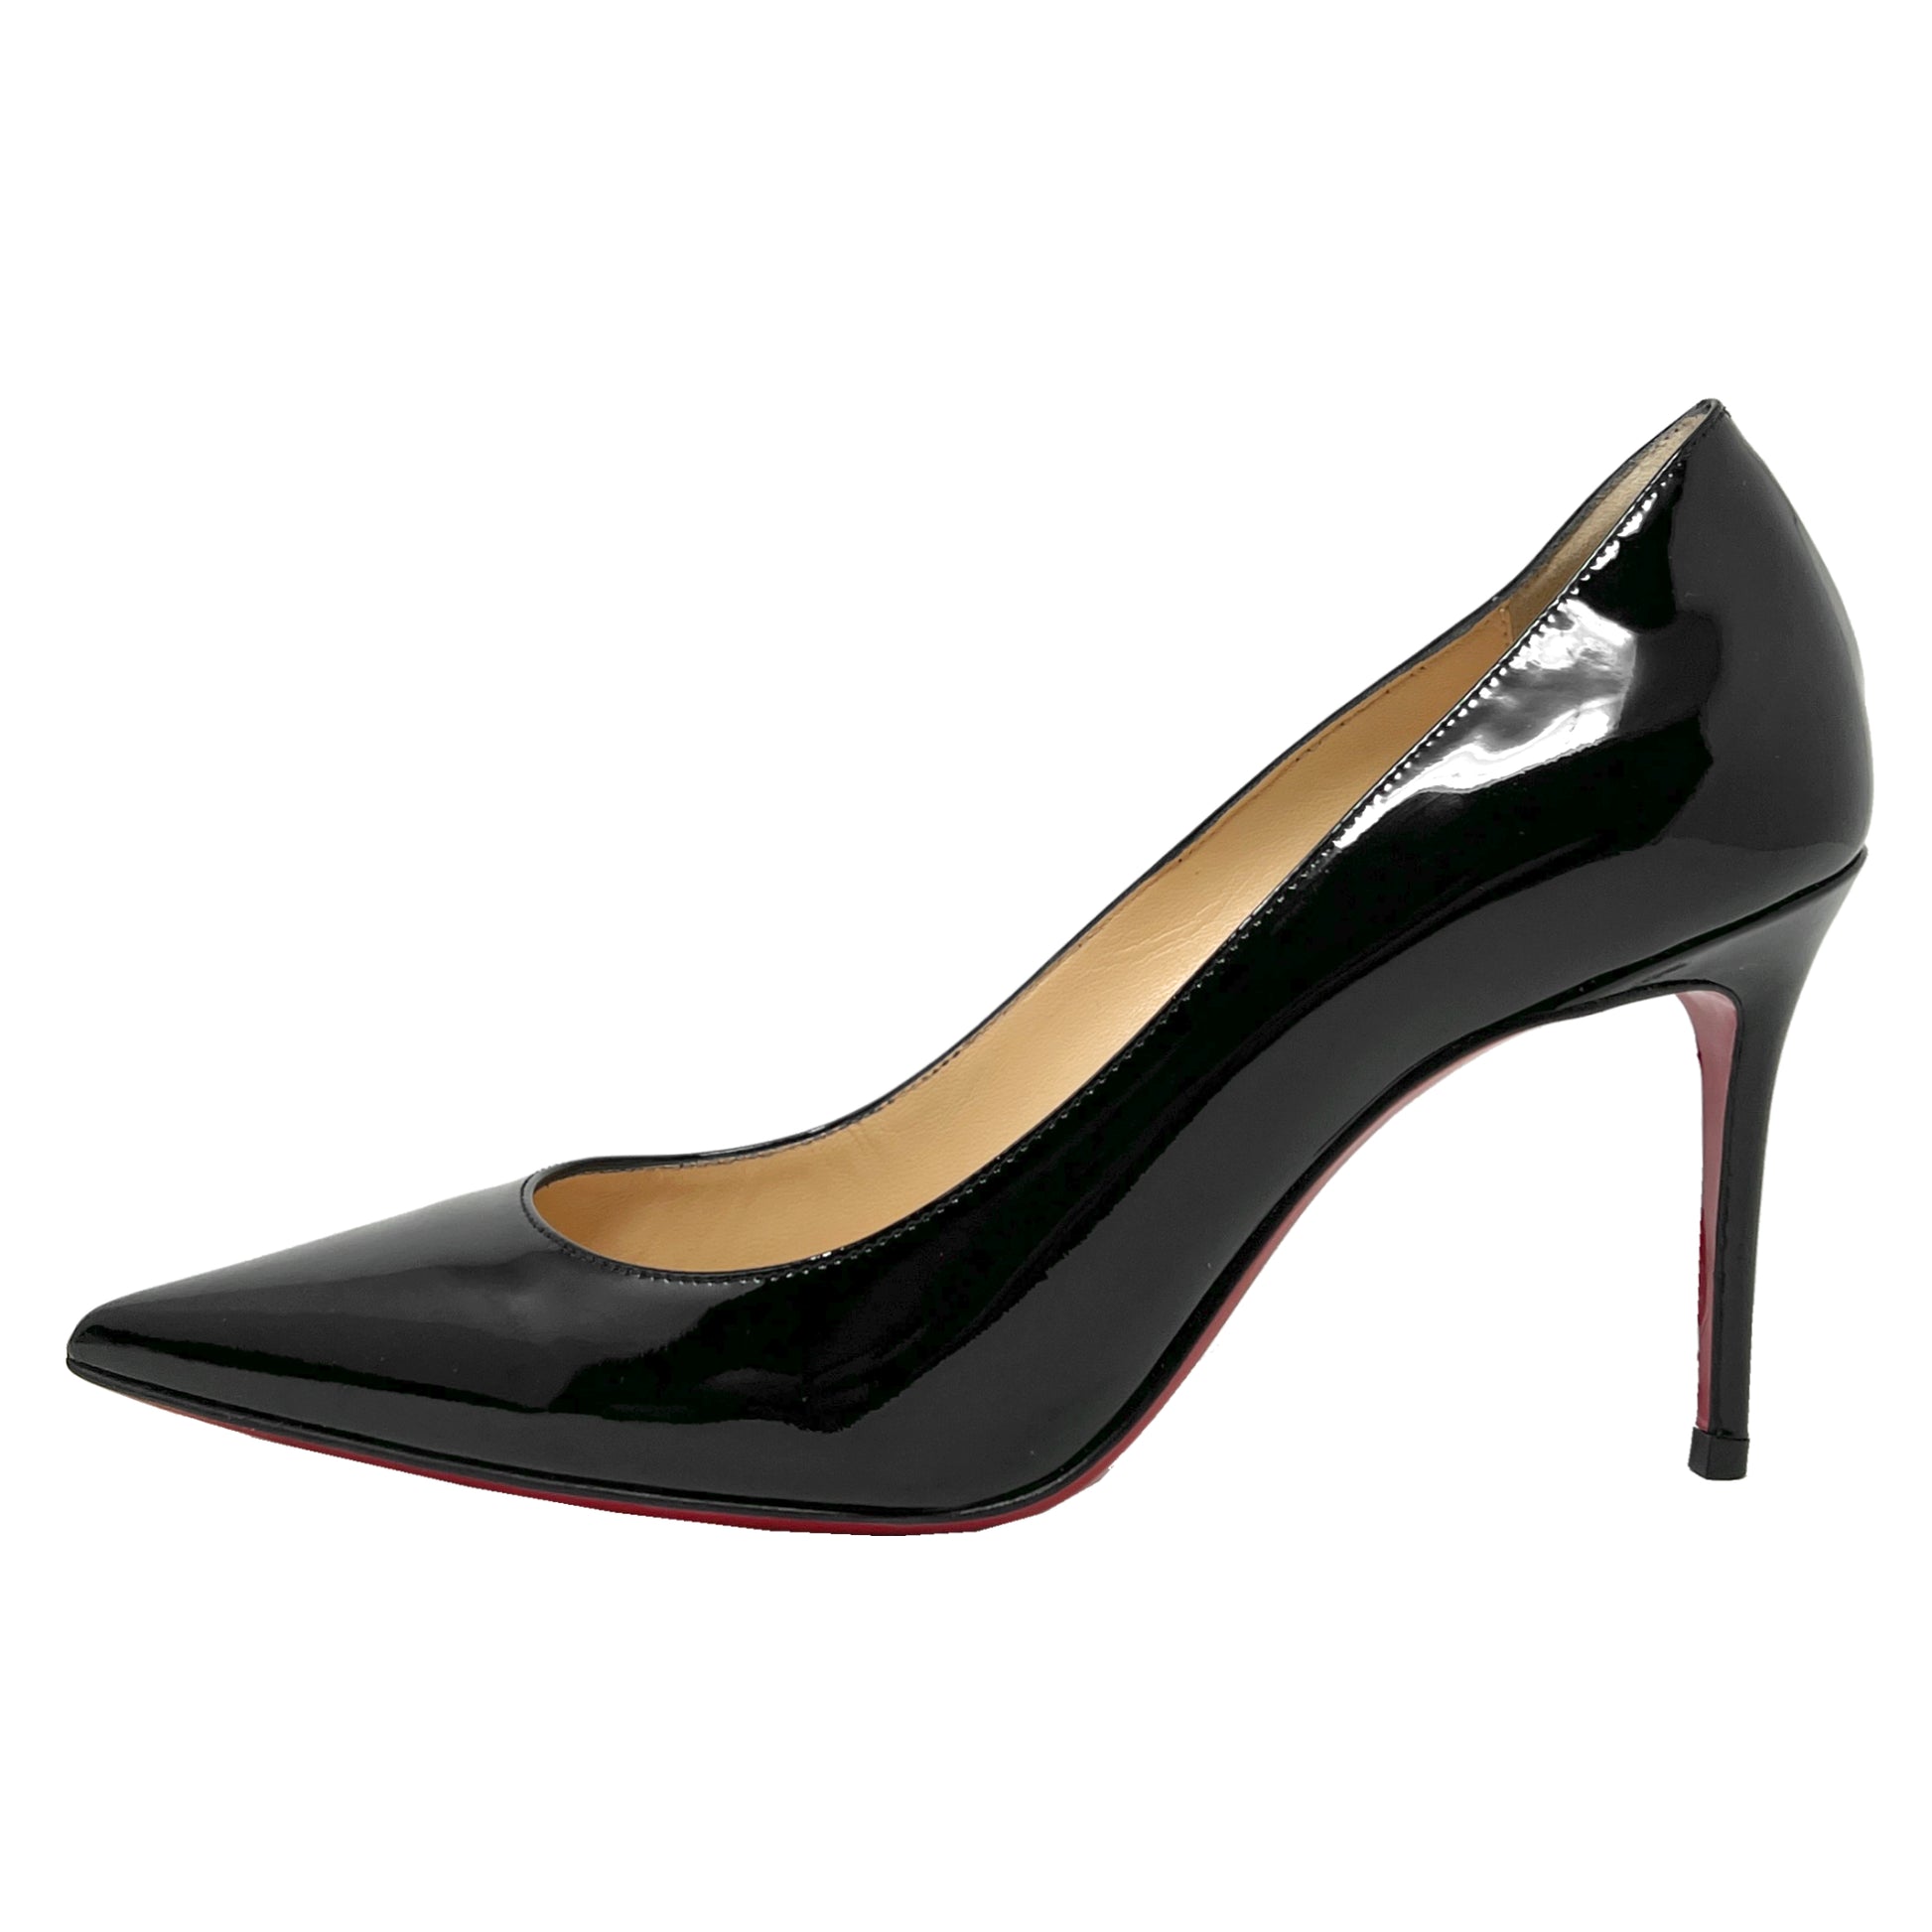 Christian Louboutin Black Patent Leather Kate 100 Pointed Toe Stiletto Heels Pumps